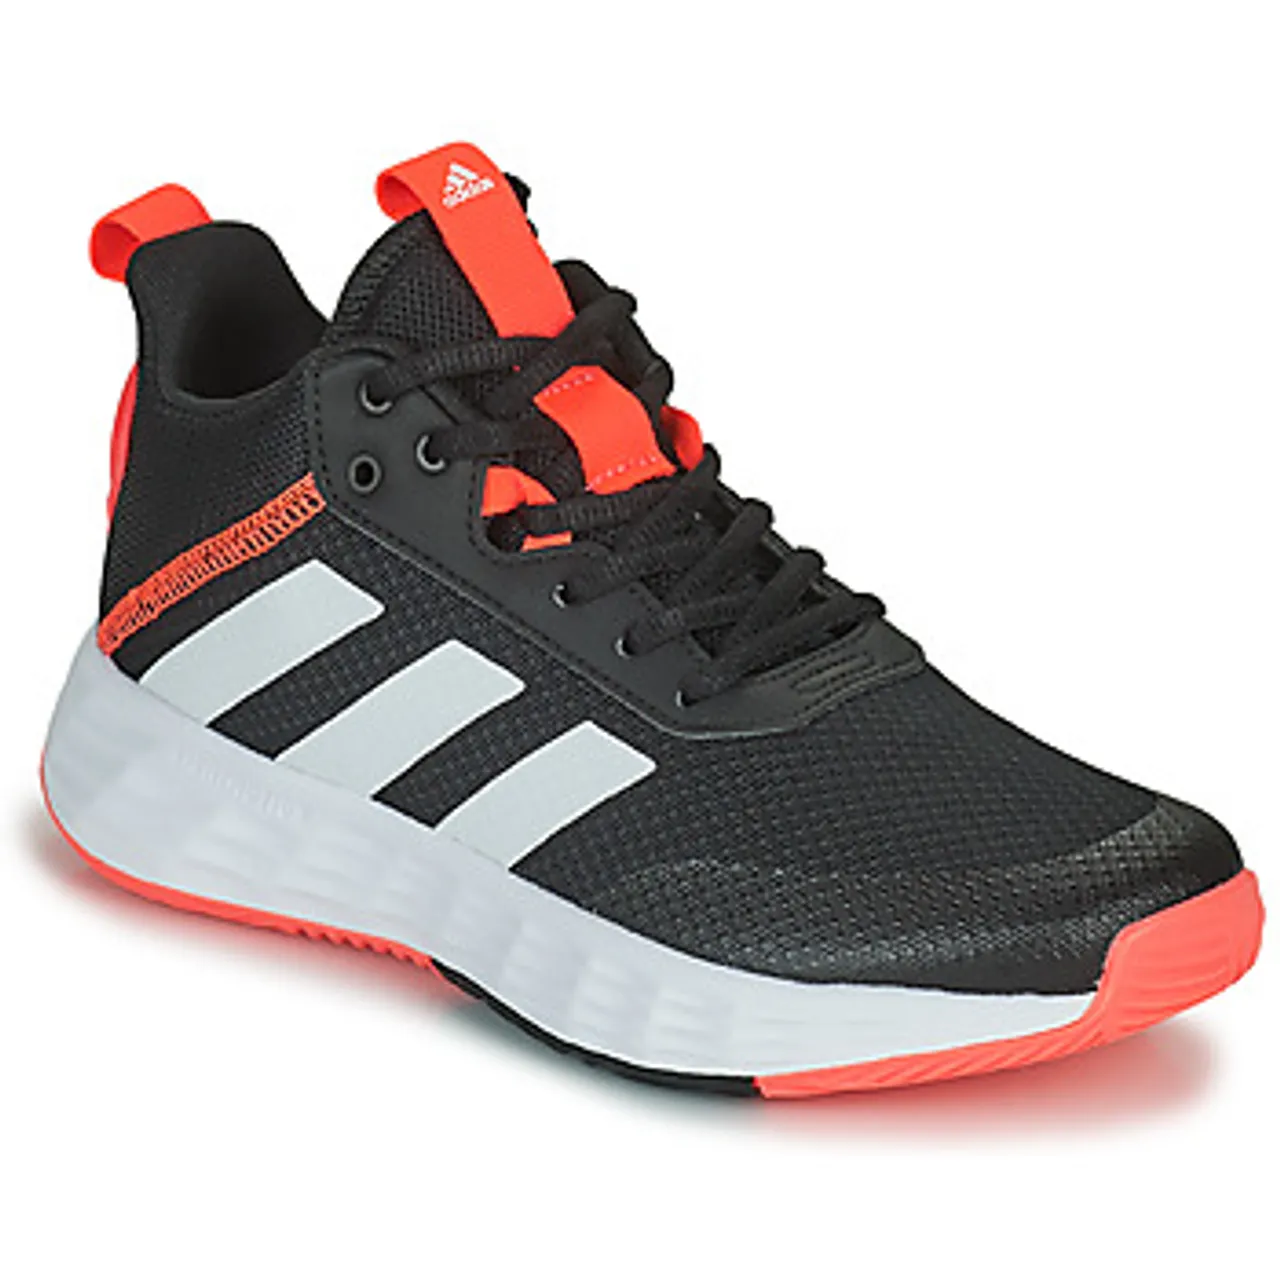 adidas  OWNTHEGAME 2.0 K  boys's Children's Shoes (High-top Trainers) in Black